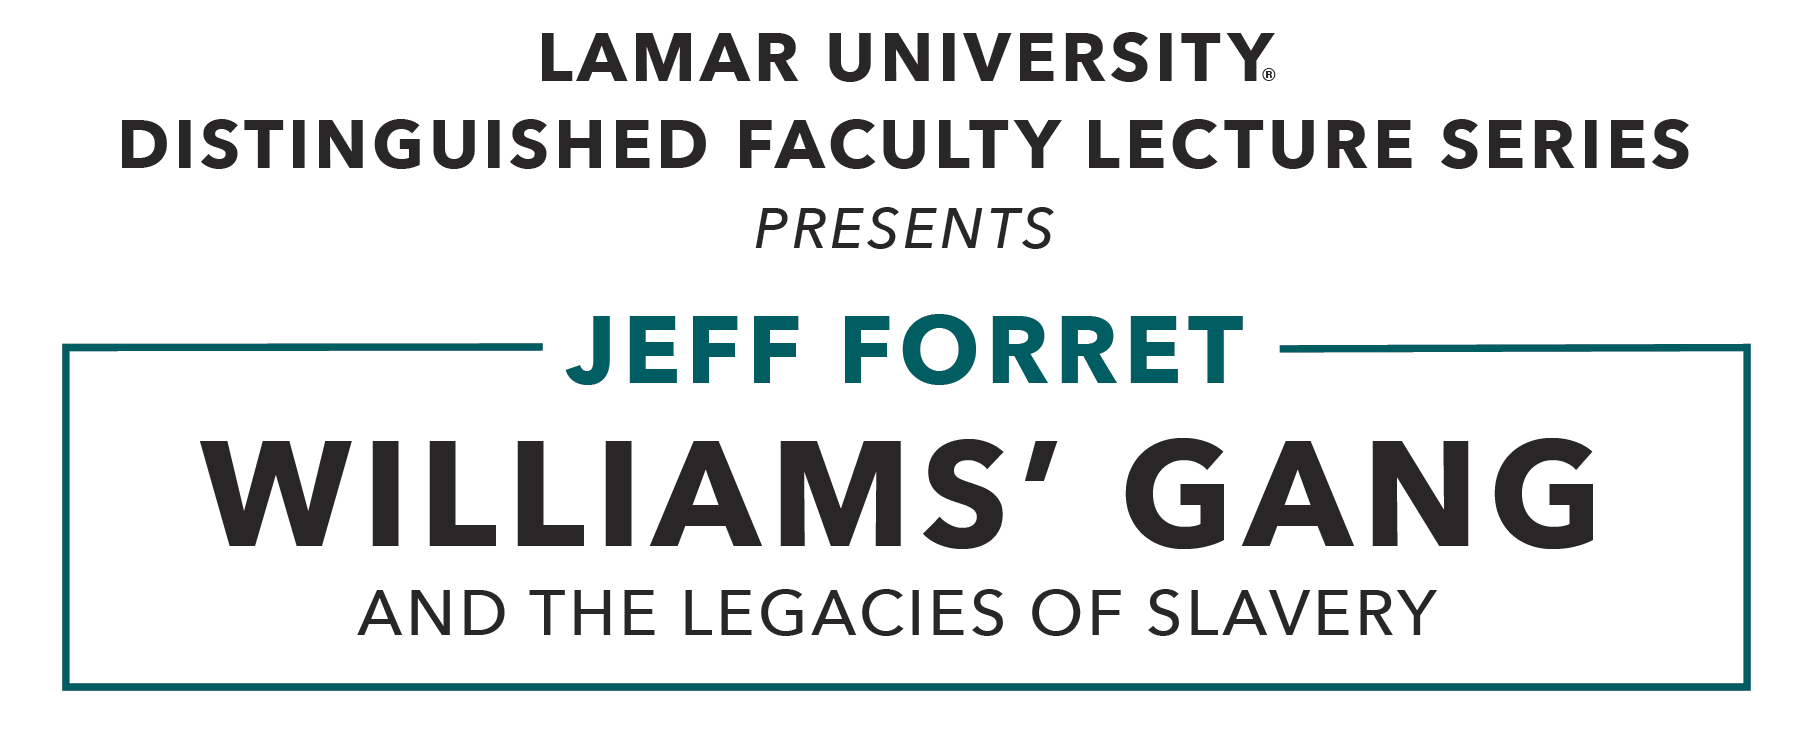 Lamar University Distinguished Faculty Lecture Series Presents Jeff Forret Williams' Gang and the Legacies of Slavery March 31 4pm